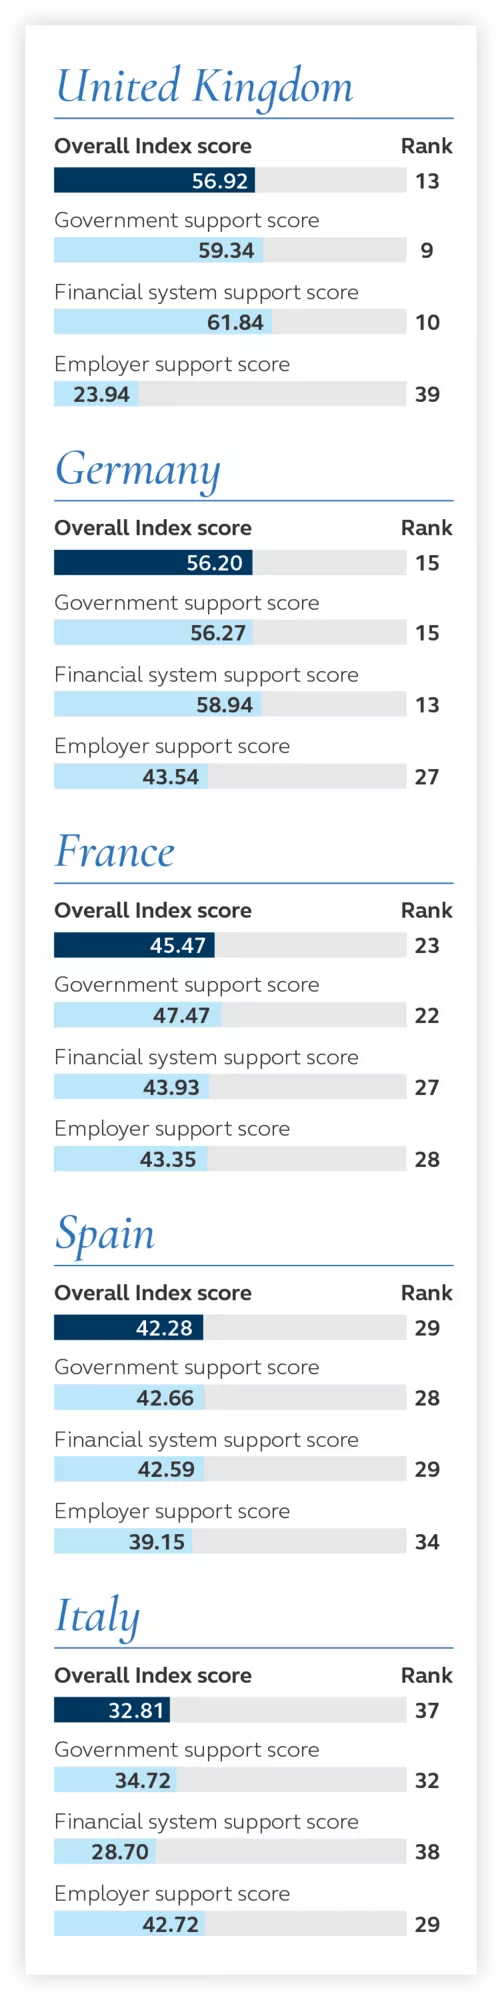 Index scores for United Kingdom, Germany, France, Spain, and Italy